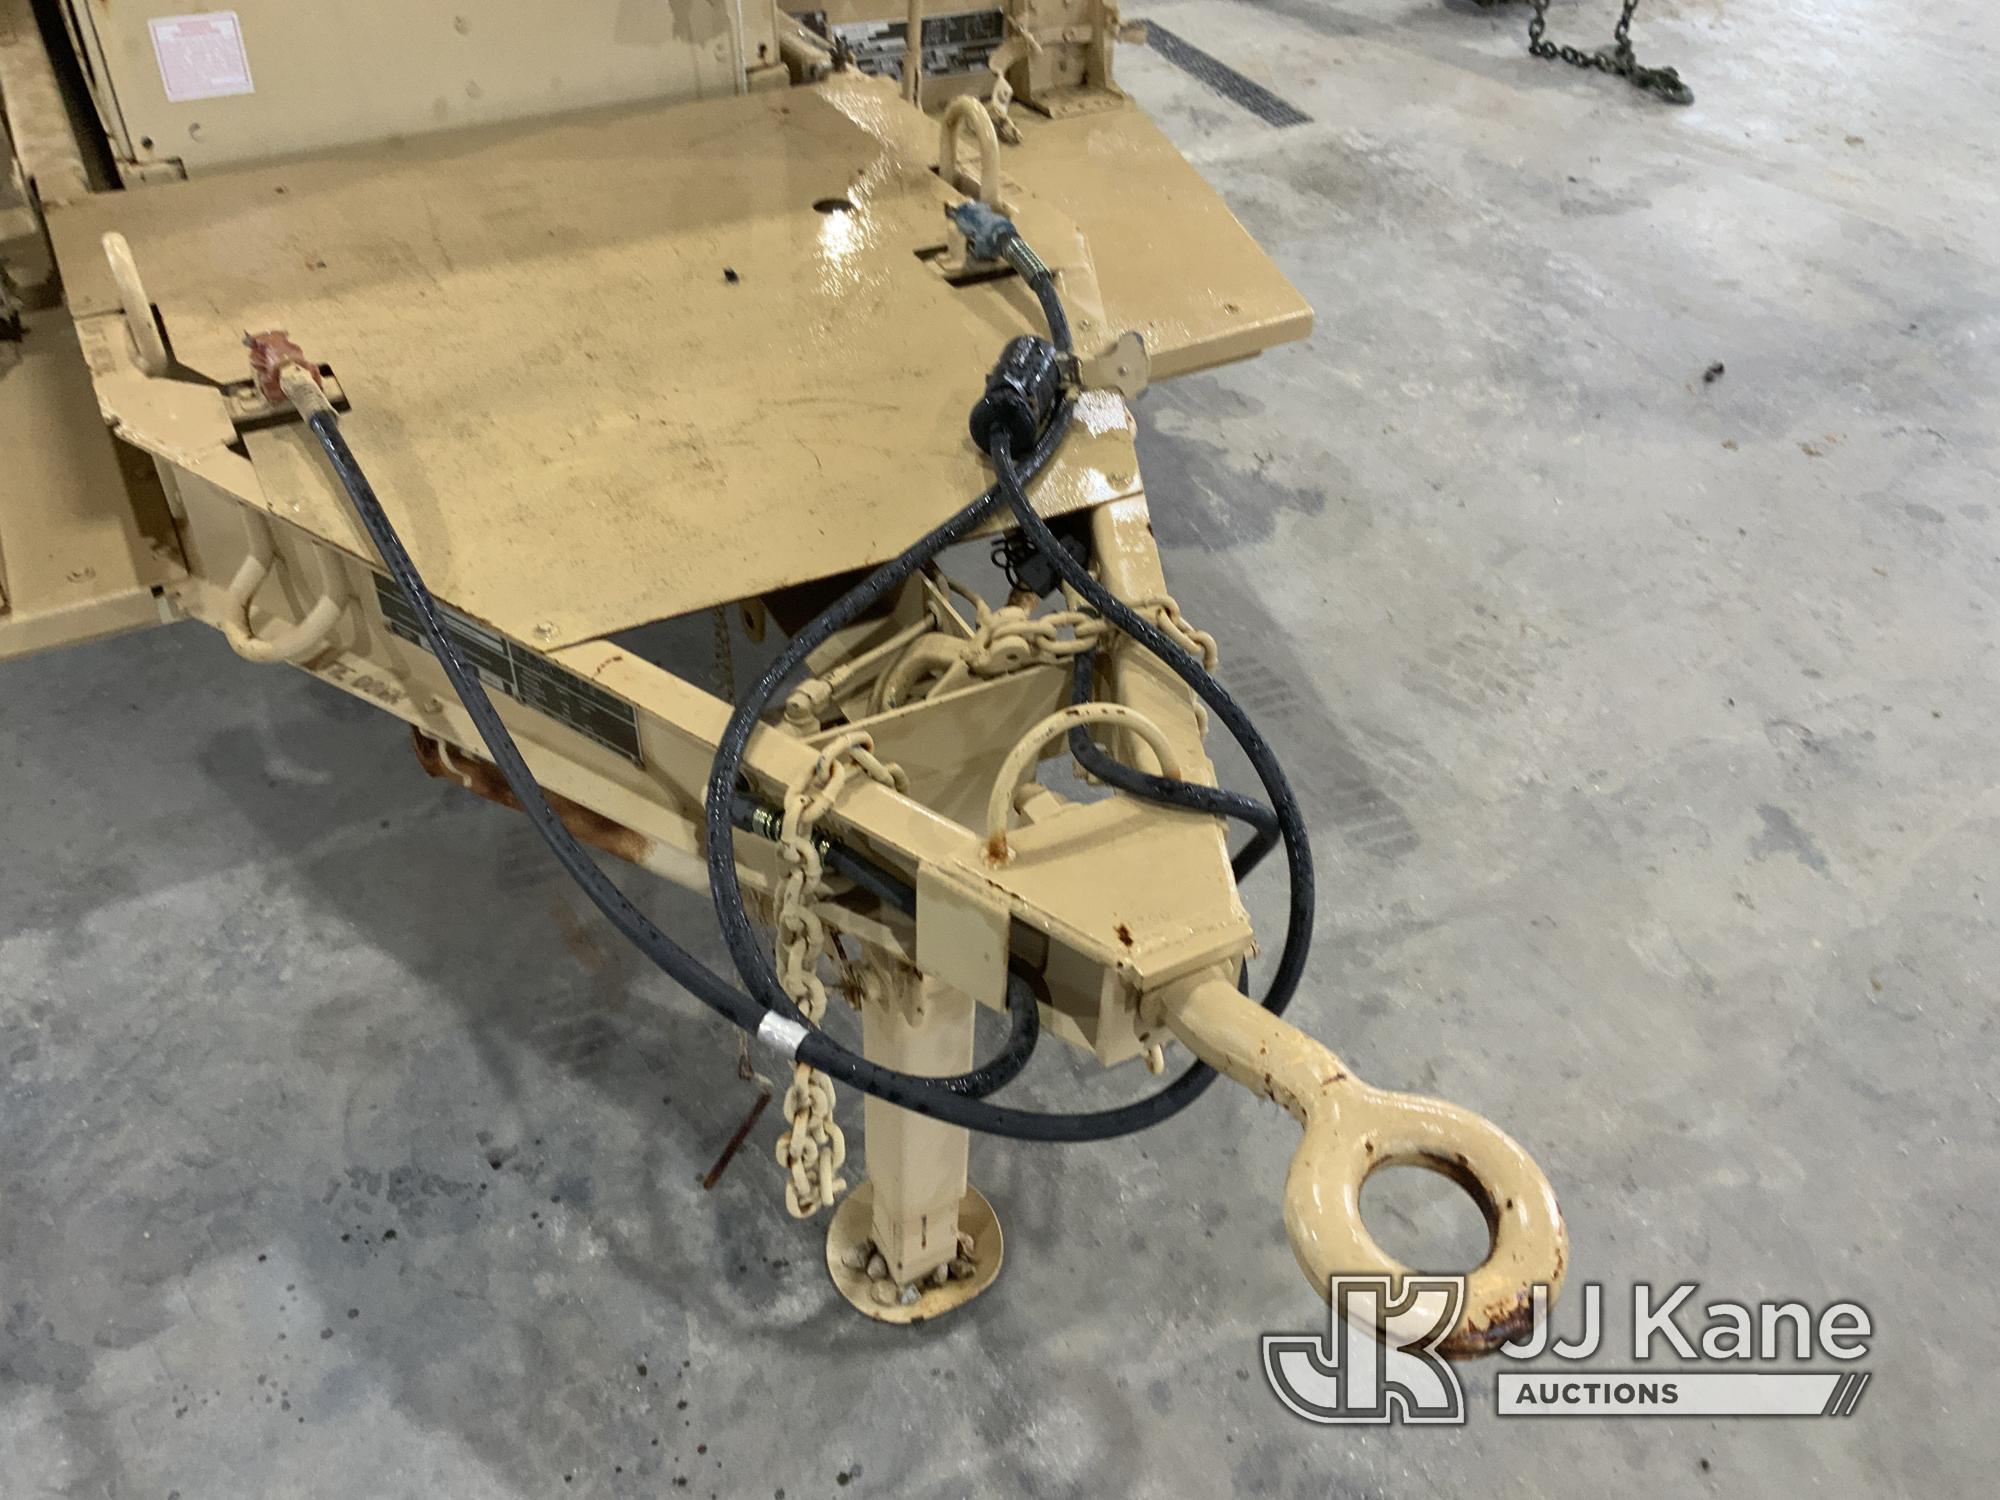 (Aubrey, TX) 2000 Utility Tool & Body M200A1 Trailered Generator Turns over, Unit has bad controller